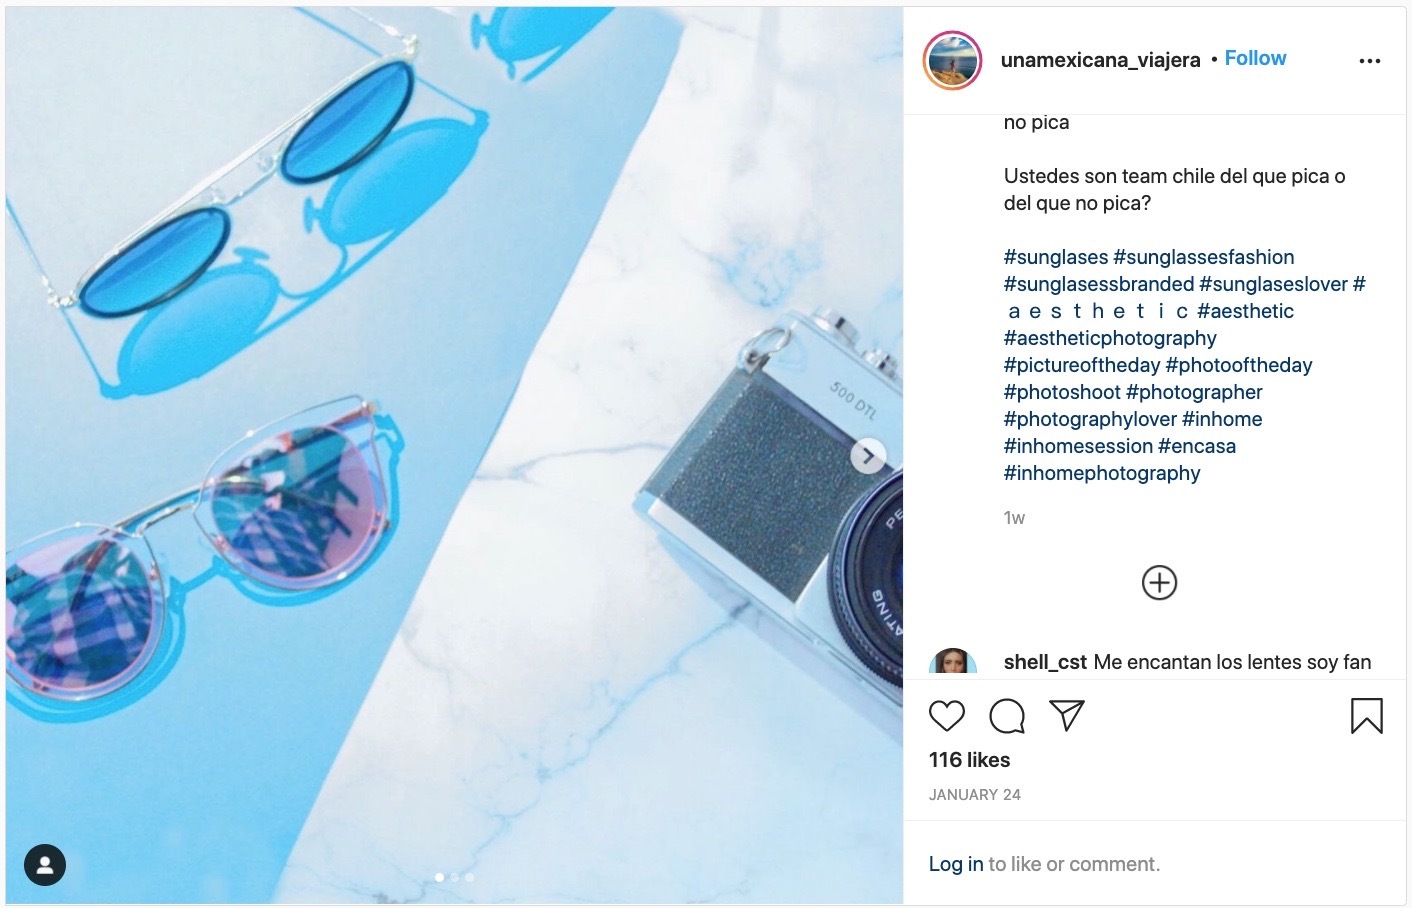 Instagram post with a photo of sunglasses and a camera with the hashtag #photography